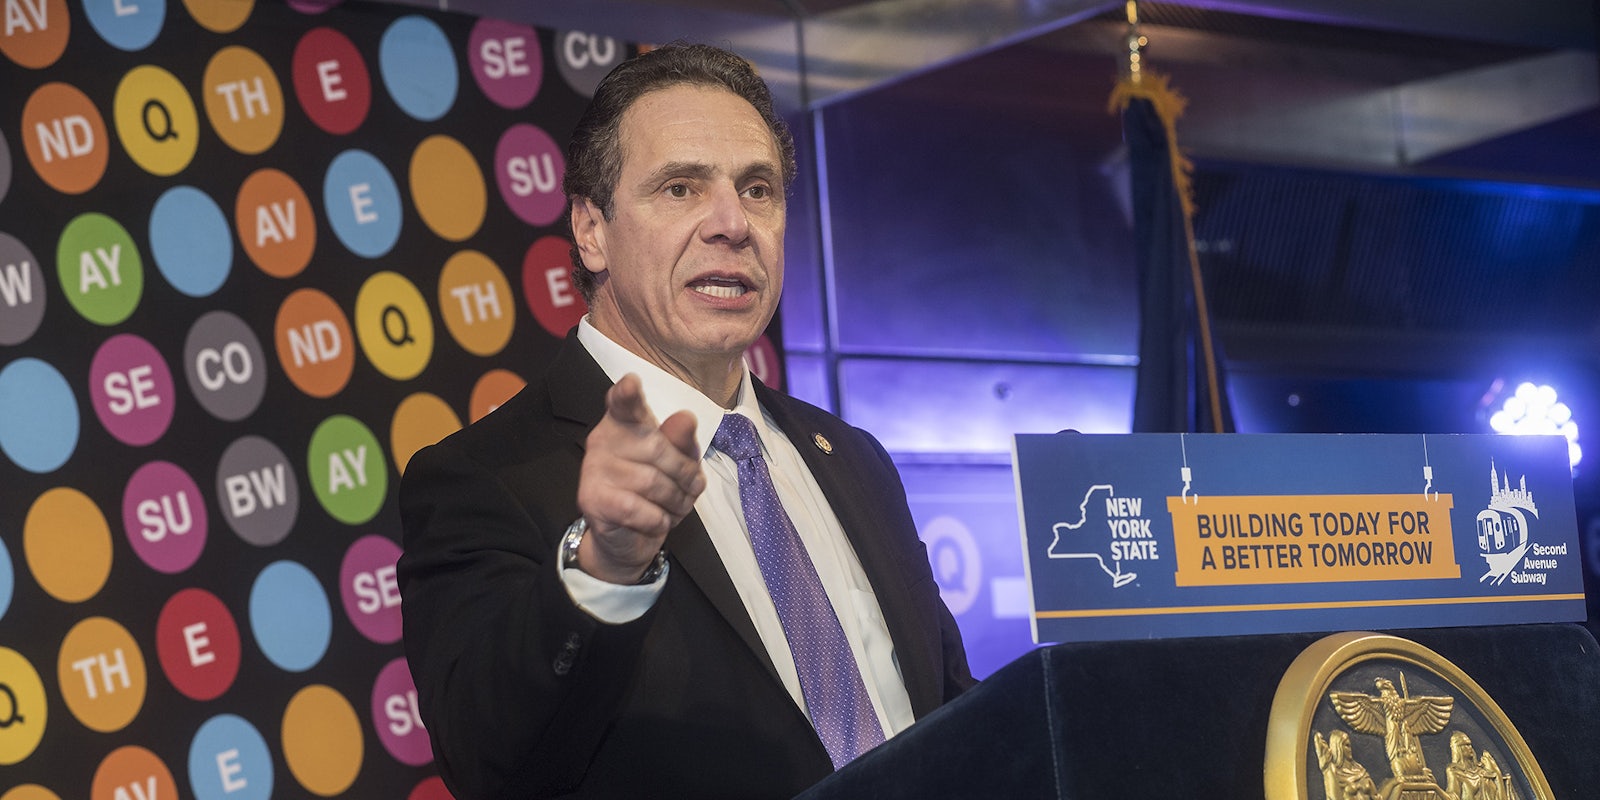 Gov. Andrew Cuomo. He signed a law that bars law enforcement from accessing information from contact tracing.